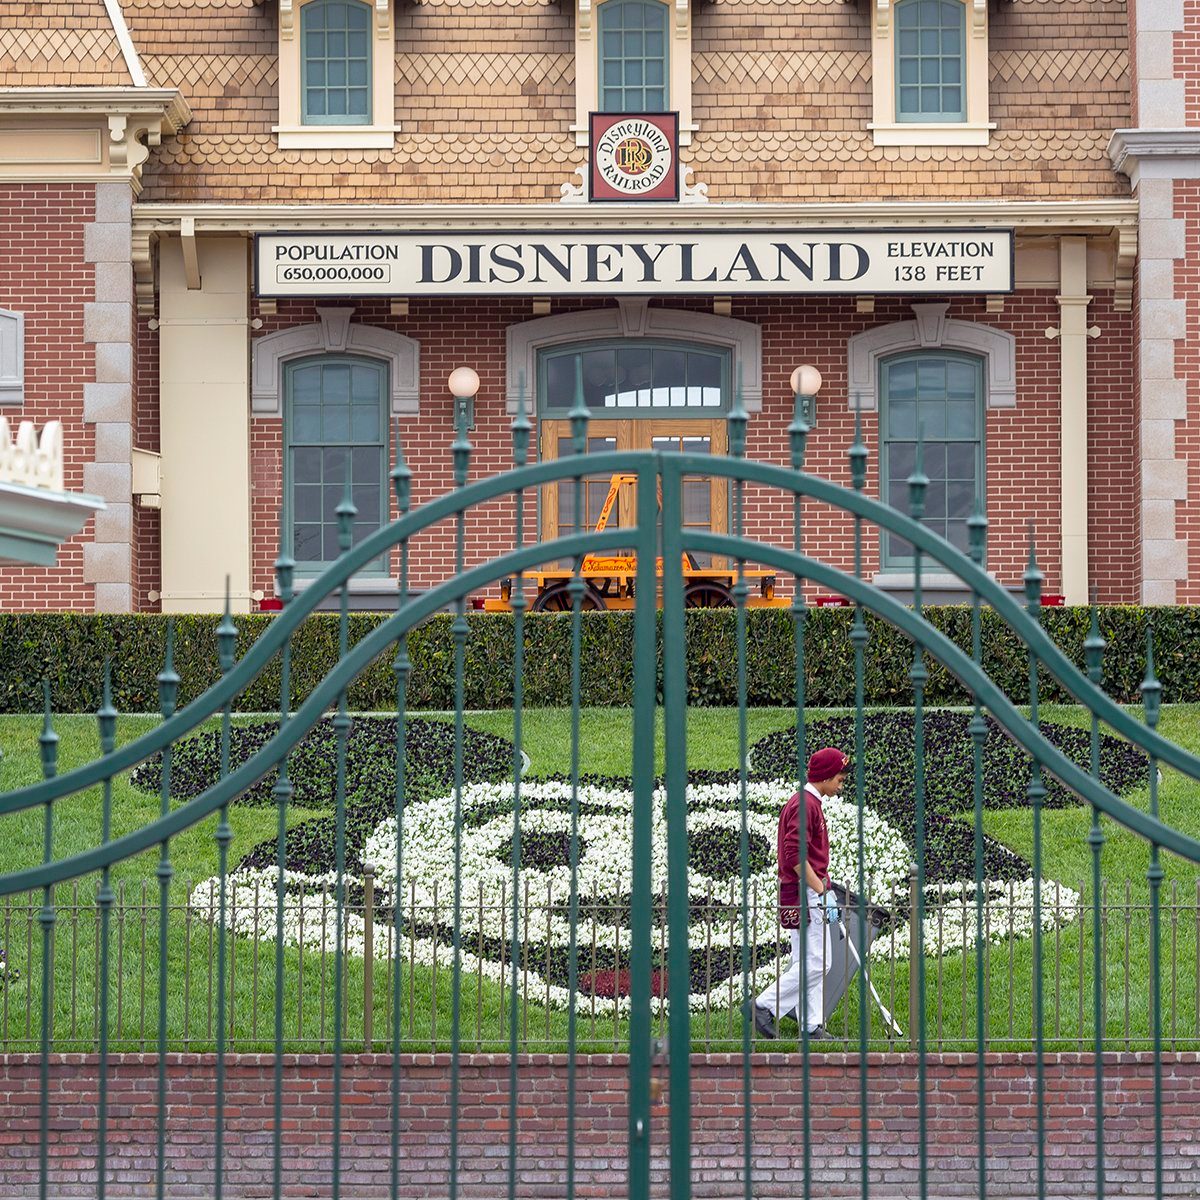 An employee cleans the grounds behind the closed gates of Disneyland Park on the first day of the closure of Disneyland and Disney California Adventure theme parks as fear of the spread of coronavirus continue, in Anaheim, California, on March 14, 2020. - The World Health Organization said March 13, 2020 it was not yet possible to say when the COVID-19 pandemic, which has killed more than 5,000 people worldwide, will peak. "It's impossible for us to say when this will peak globally," Maria Van Kerkhove, who heads the WHO's emerging diseases unit, told a virtual press conference, adding that "we hope that it is sooner rather than later". (Photo by DAVID MCNEW / AFP) (Photo by DAVID MCNEW/AFP via Getty Images)